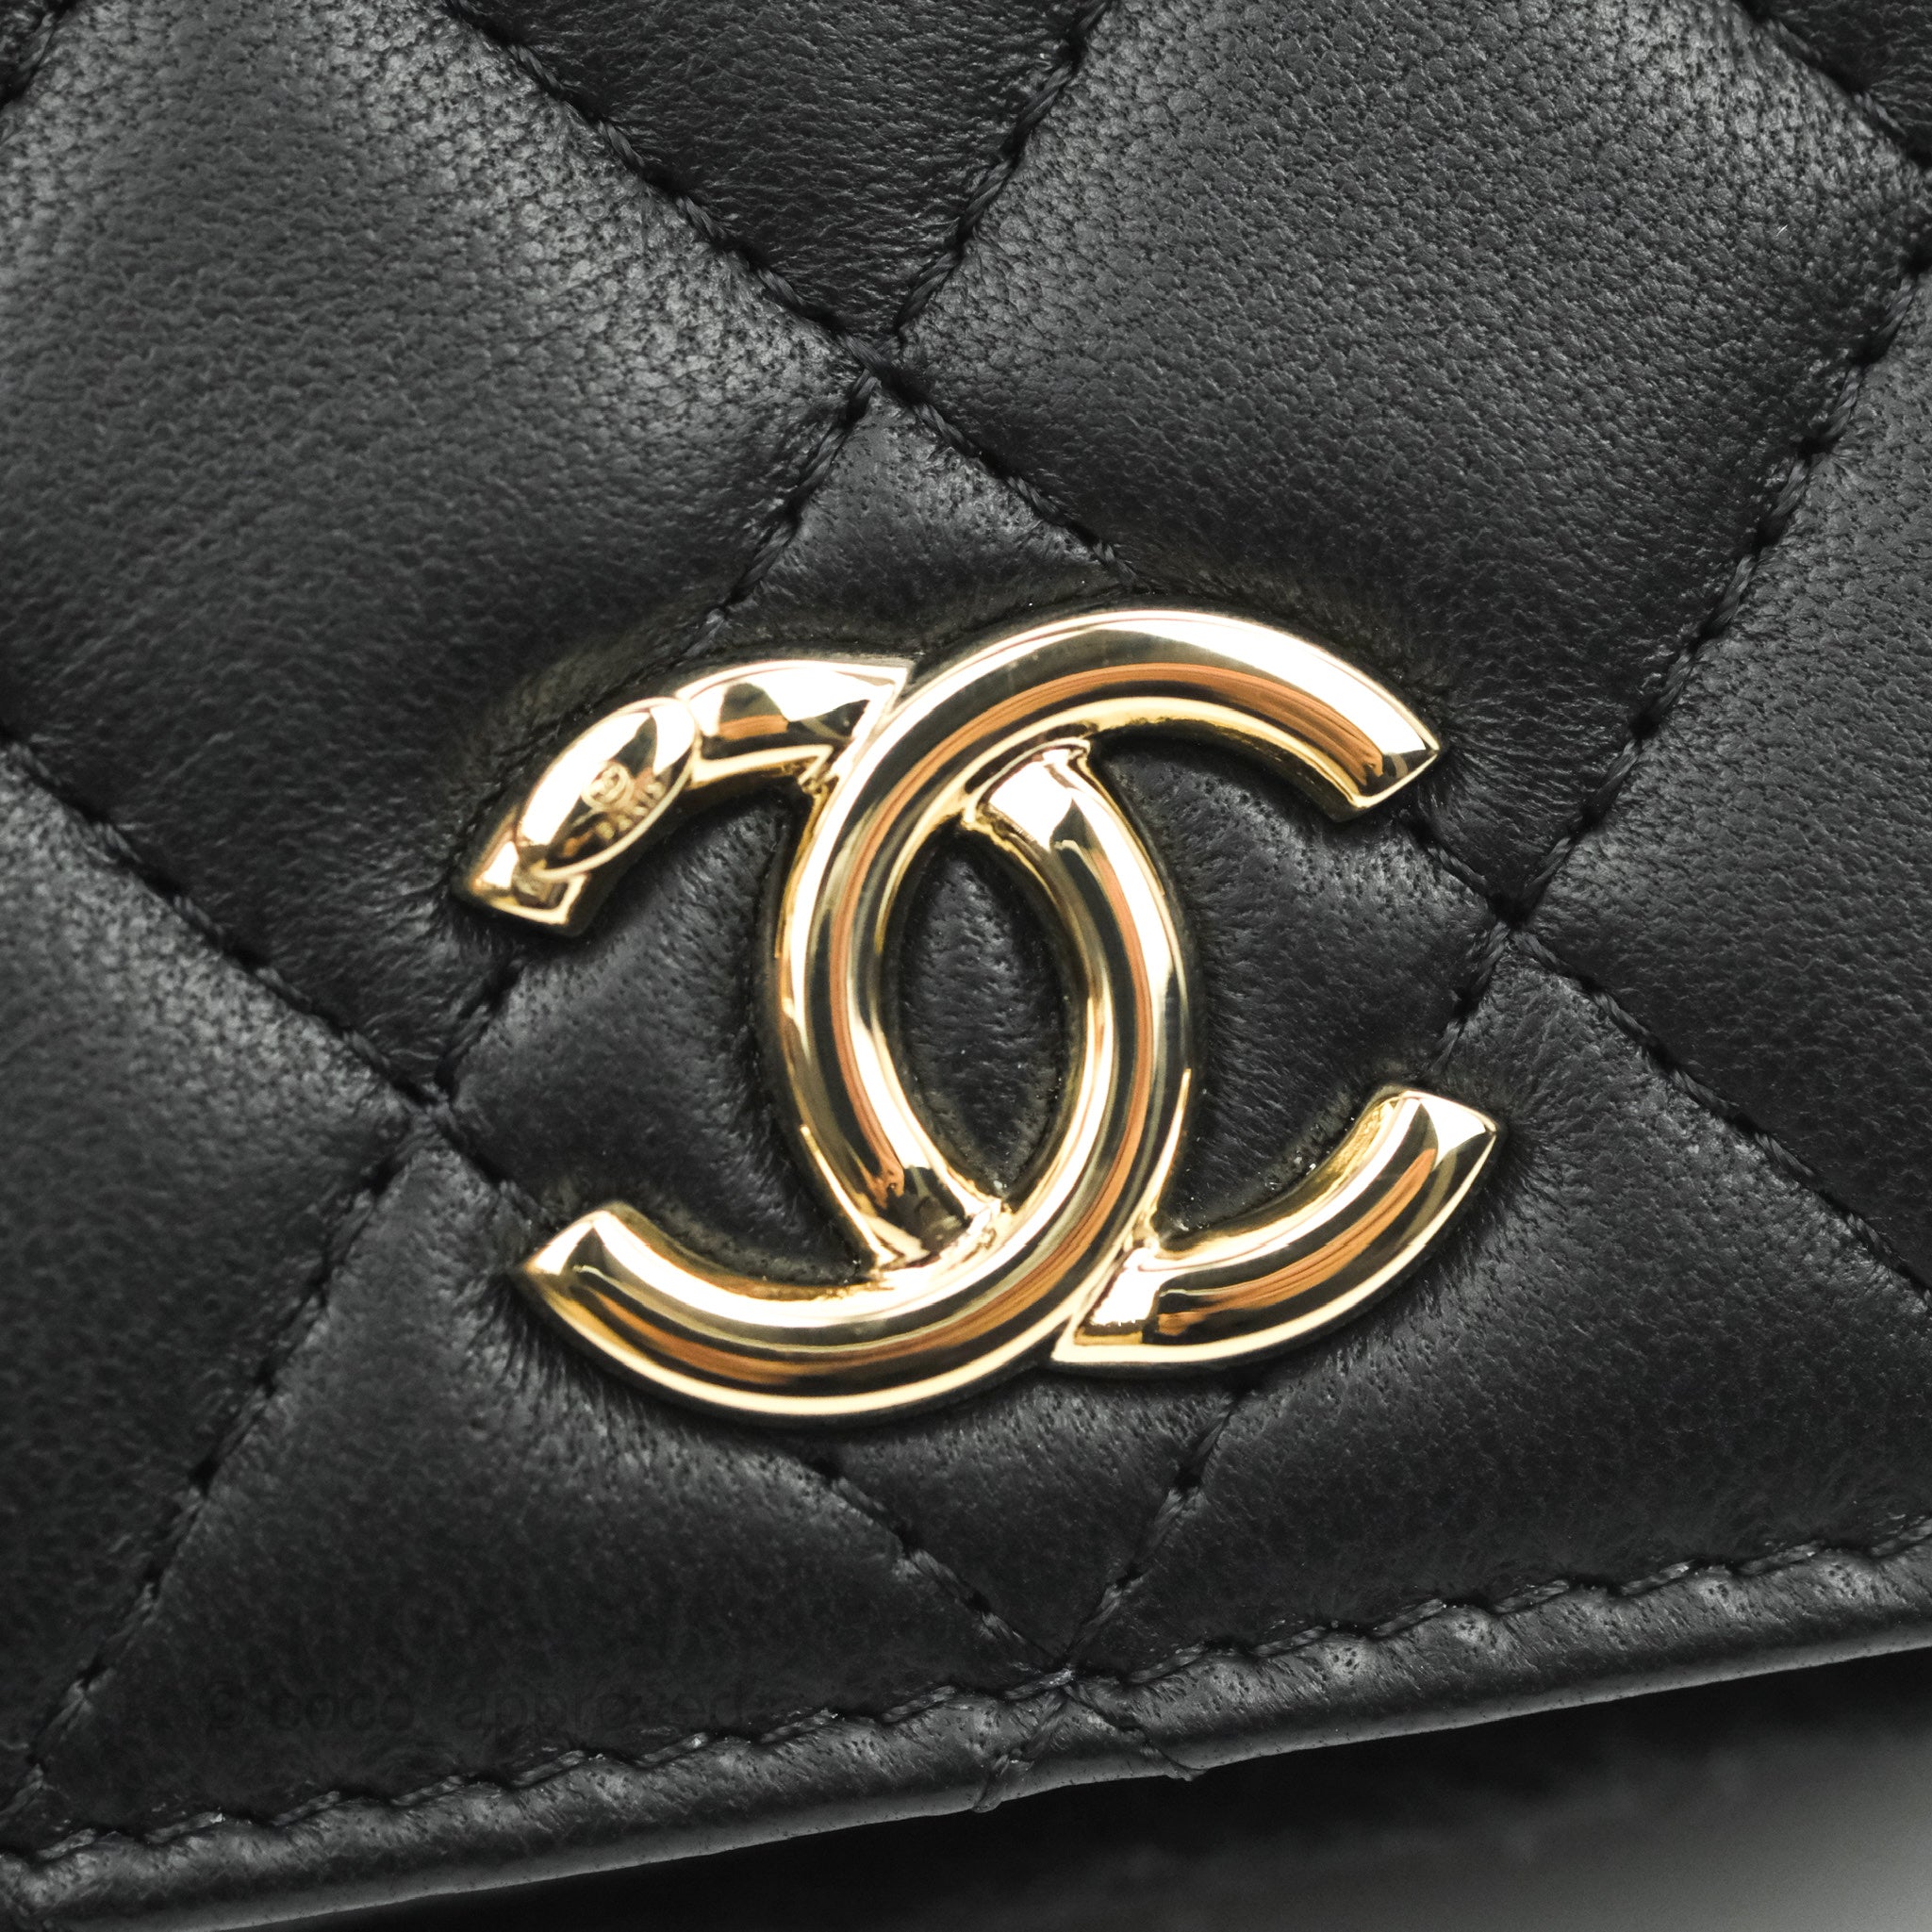 Chanel 22C Wallet On Chain Black in Lambskin Leather with Gold-tone - US